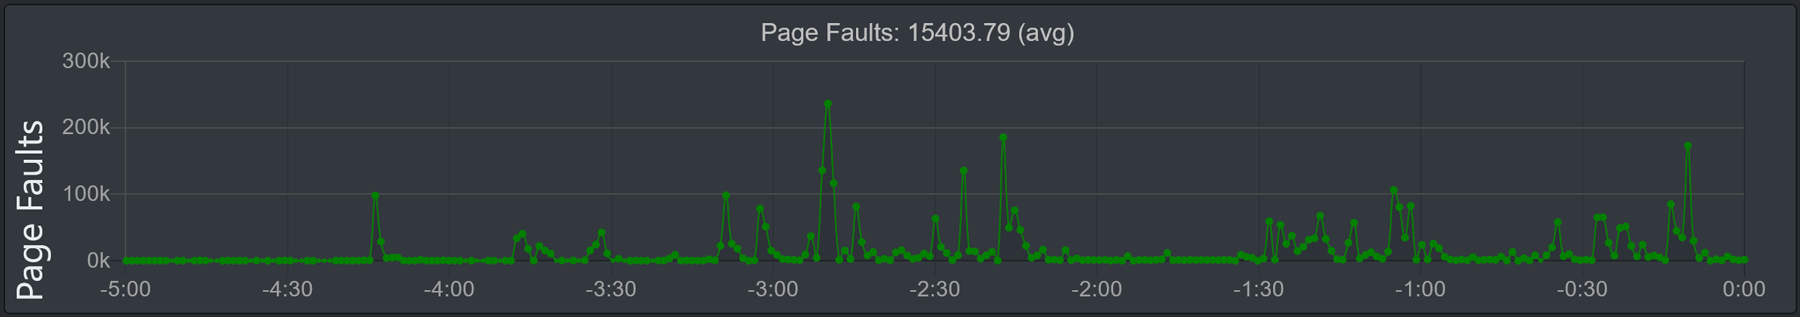 Image of the 'Page faults' graph